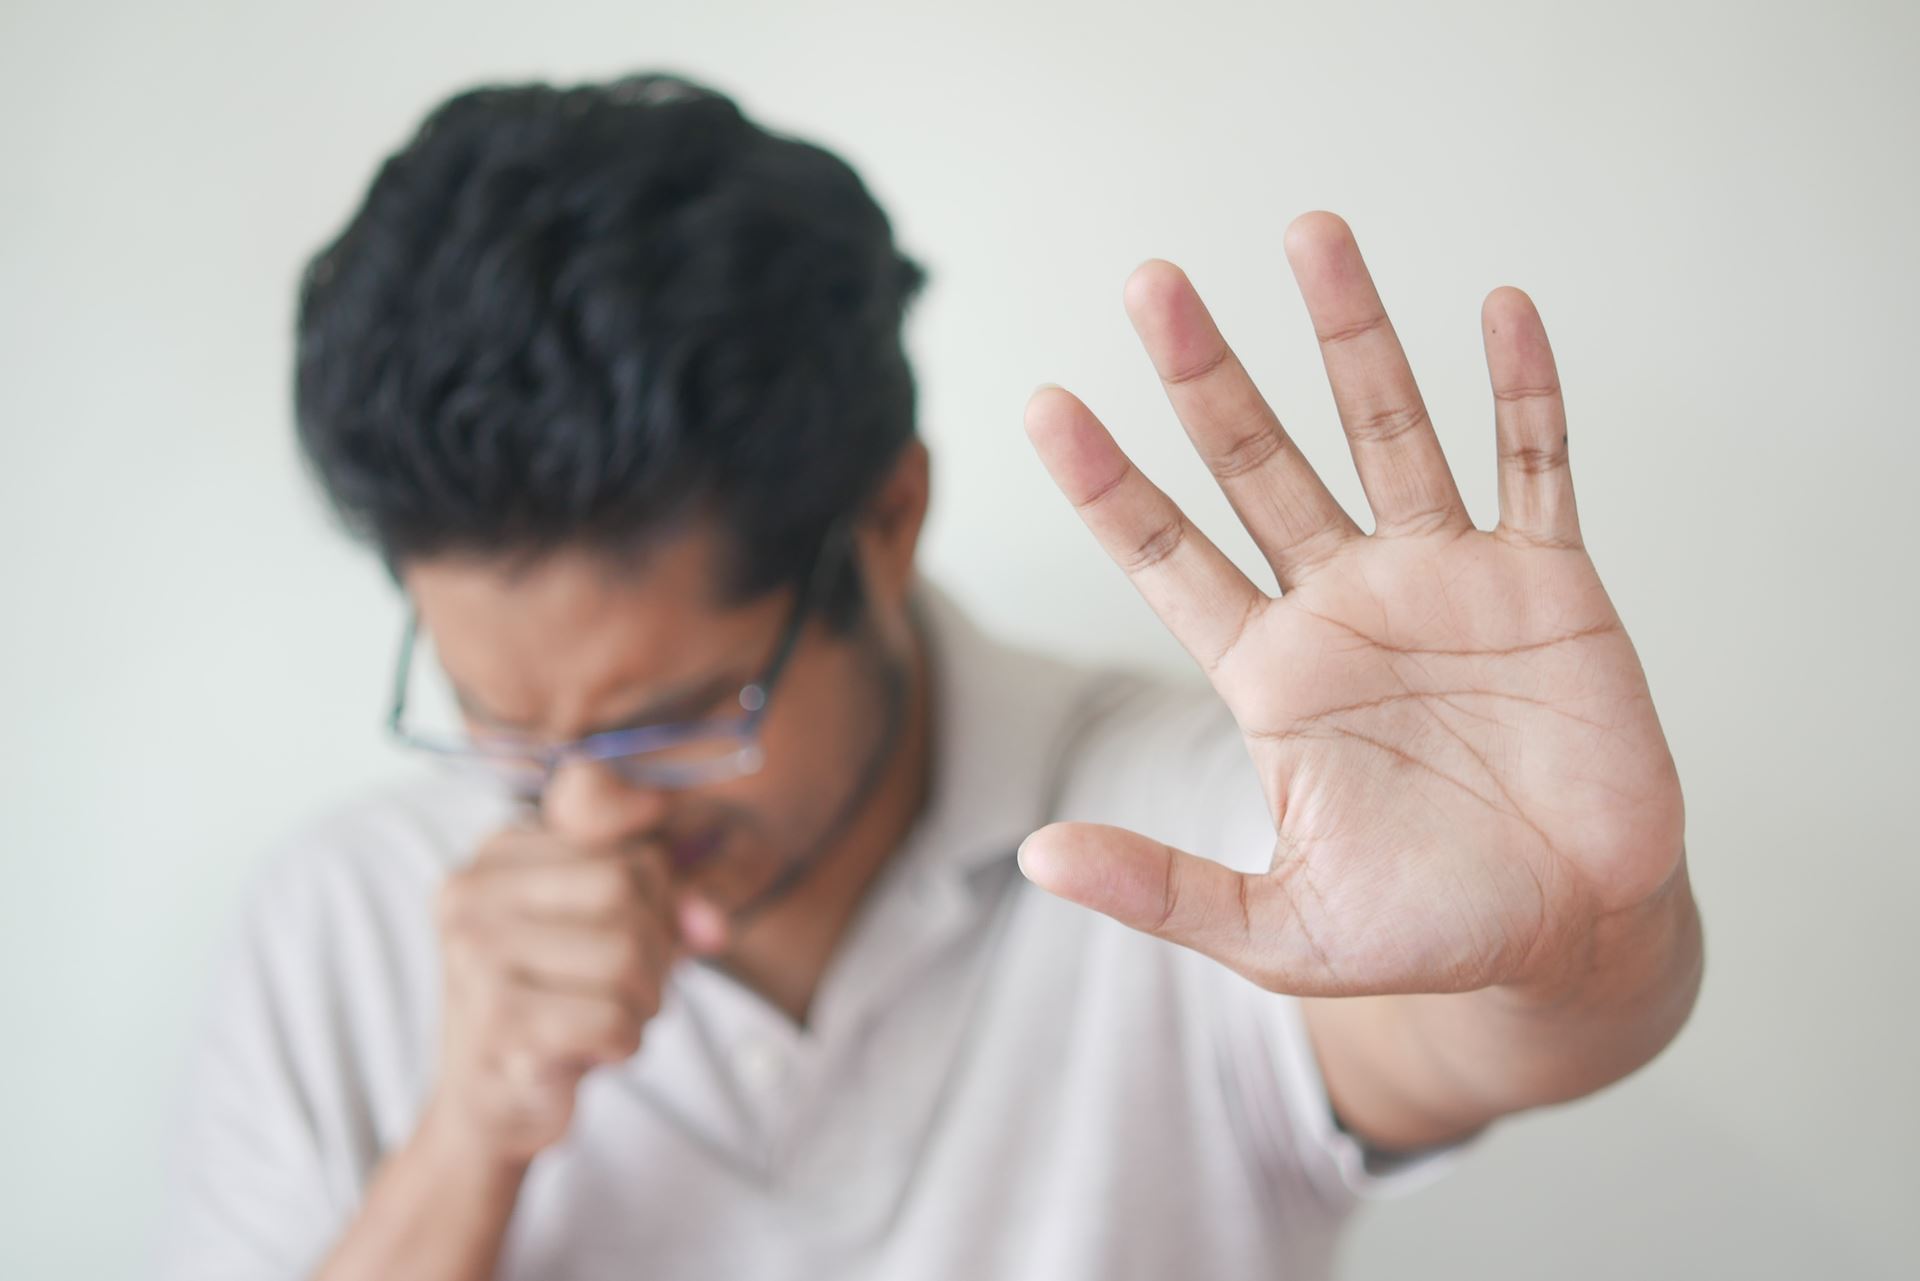 a man coughing, covering his mouth with his right hand and stretching the open palm of his left hand in a gesture to keep away